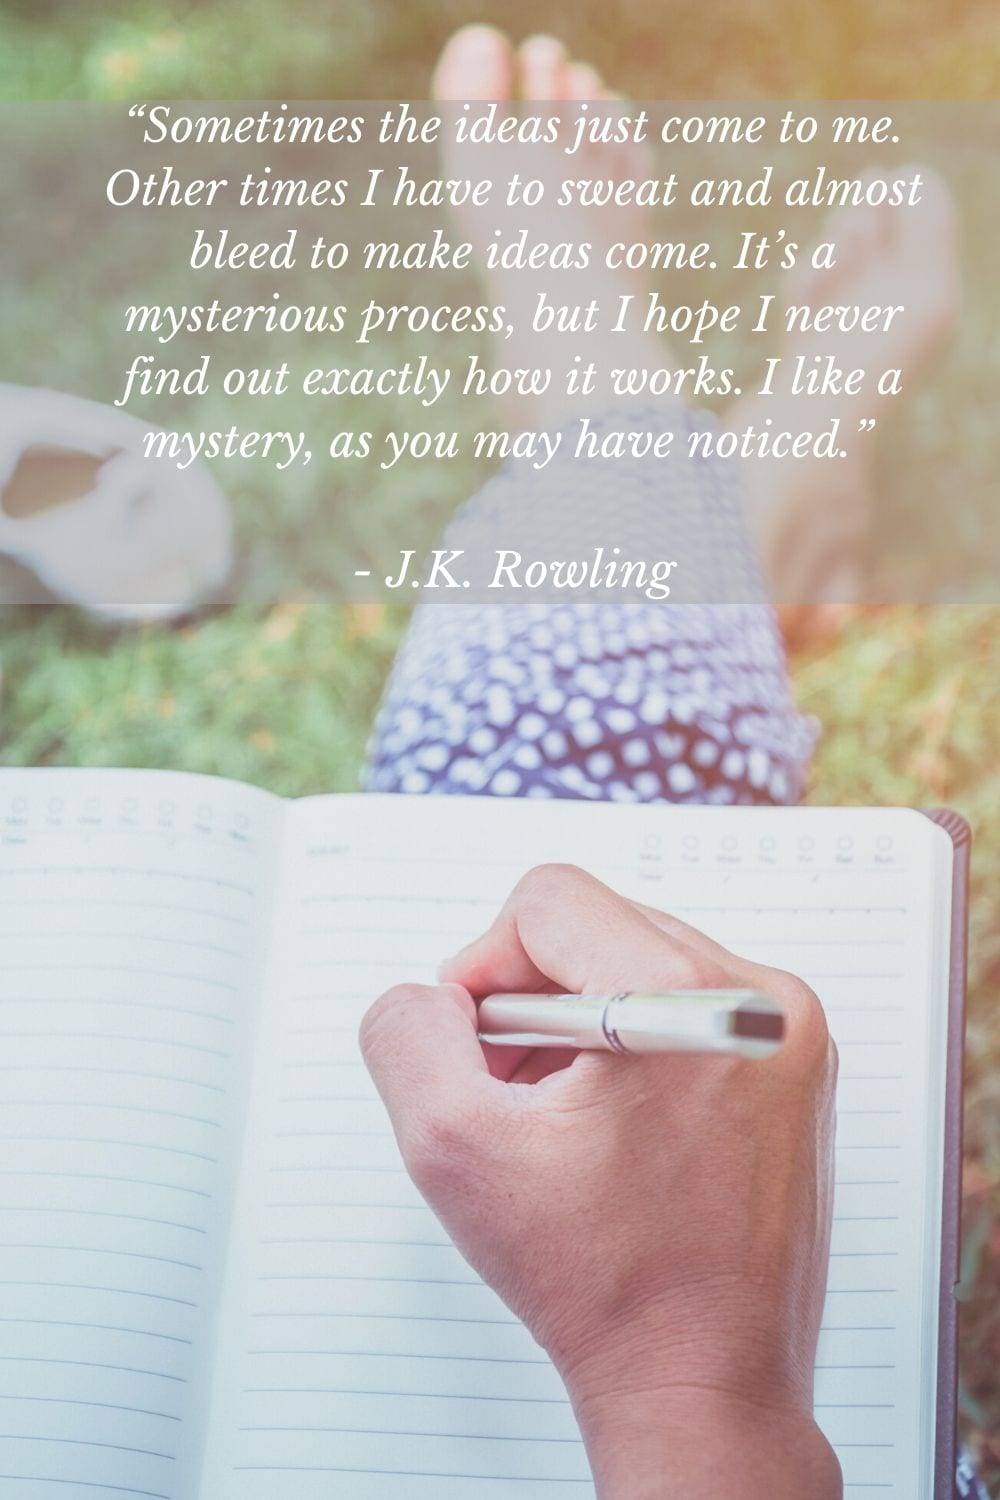 JK Rowling Writing quote 